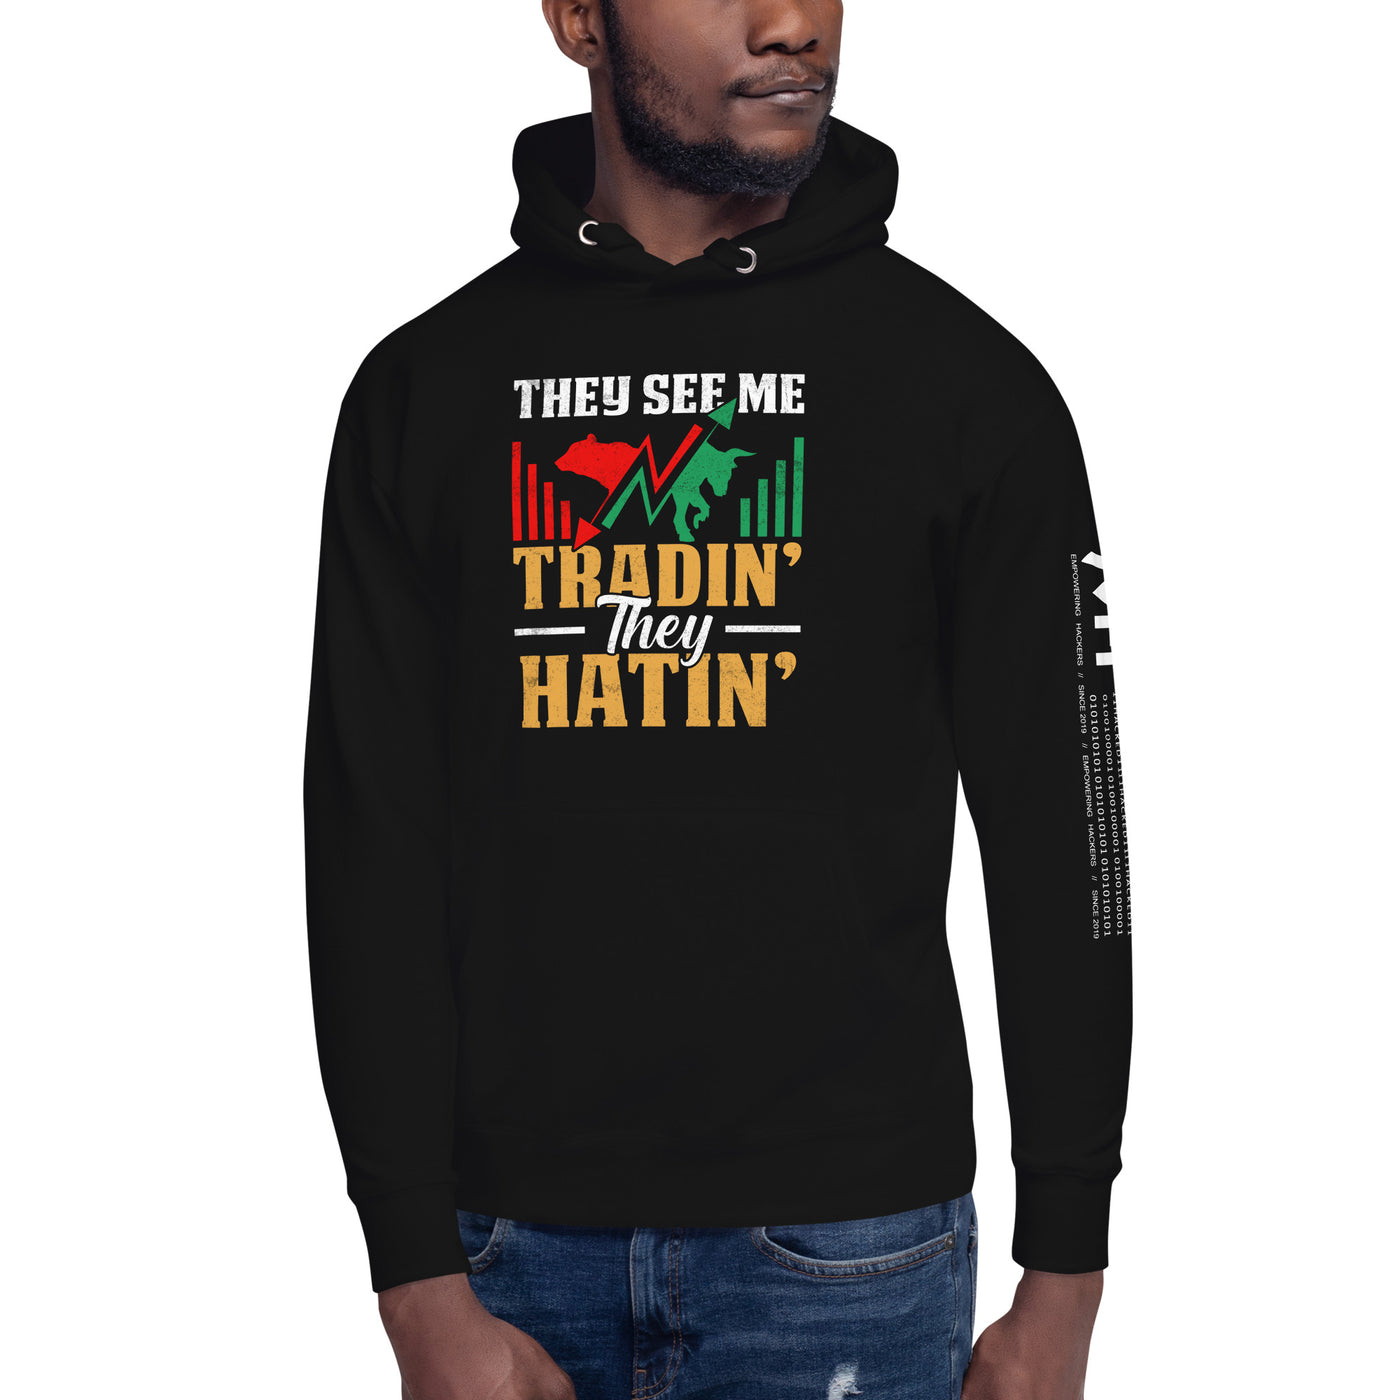 They See me Trading, they Hating -  Unisex Hoodie